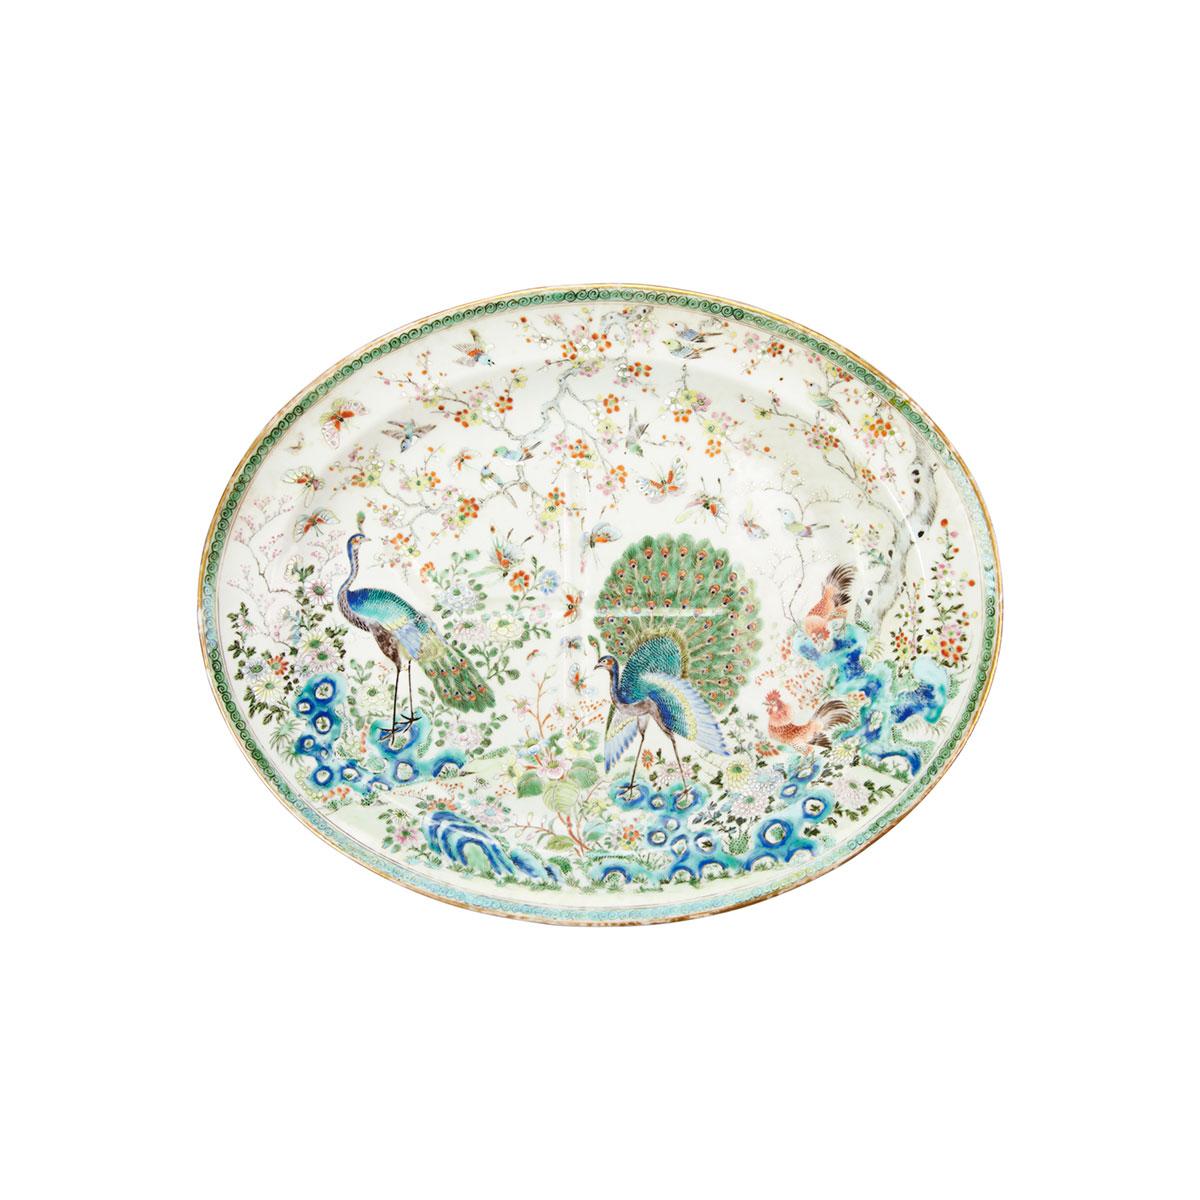 Export Famille Rose ‘Birds of Paradise’ Well and Tree Platter, 19th Century